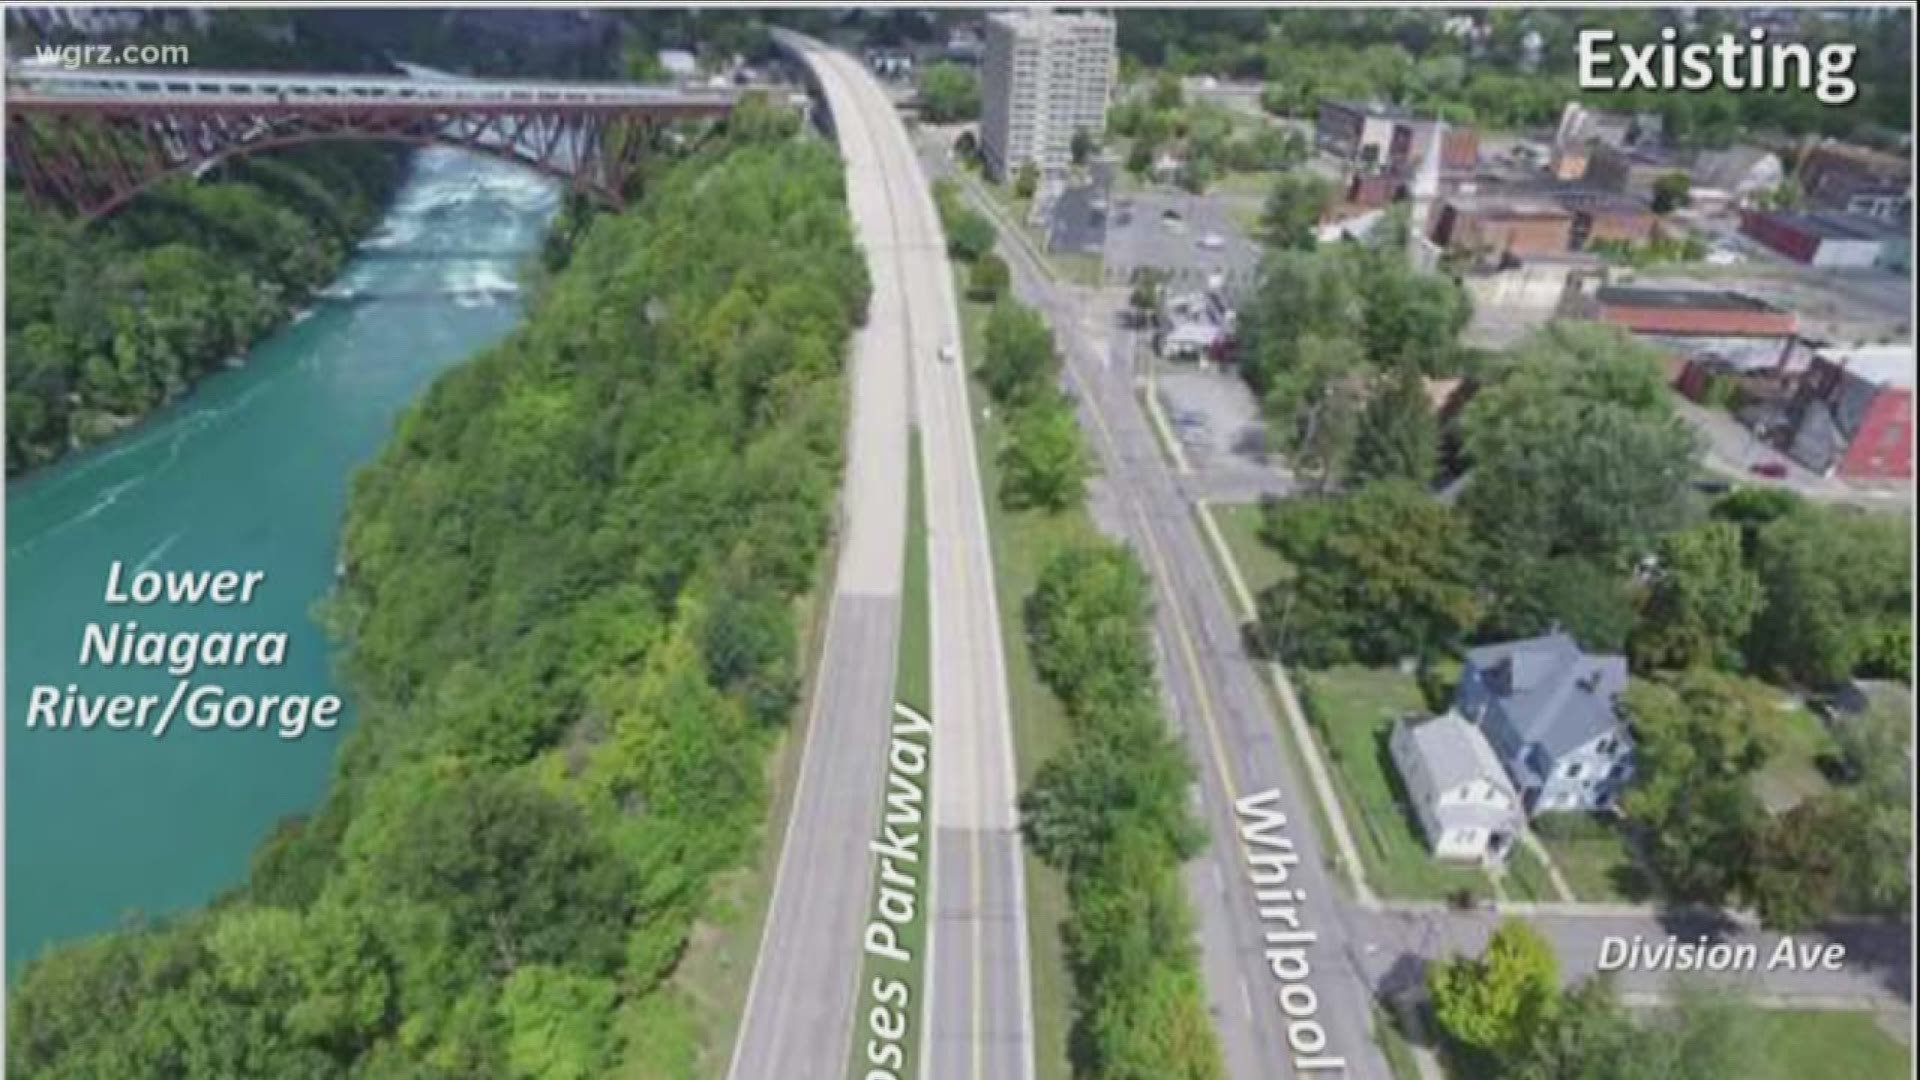 Removal of section of former Robert Moses parkway in Niagara Falls will also cause Whirlpool Bridge to close for a month.